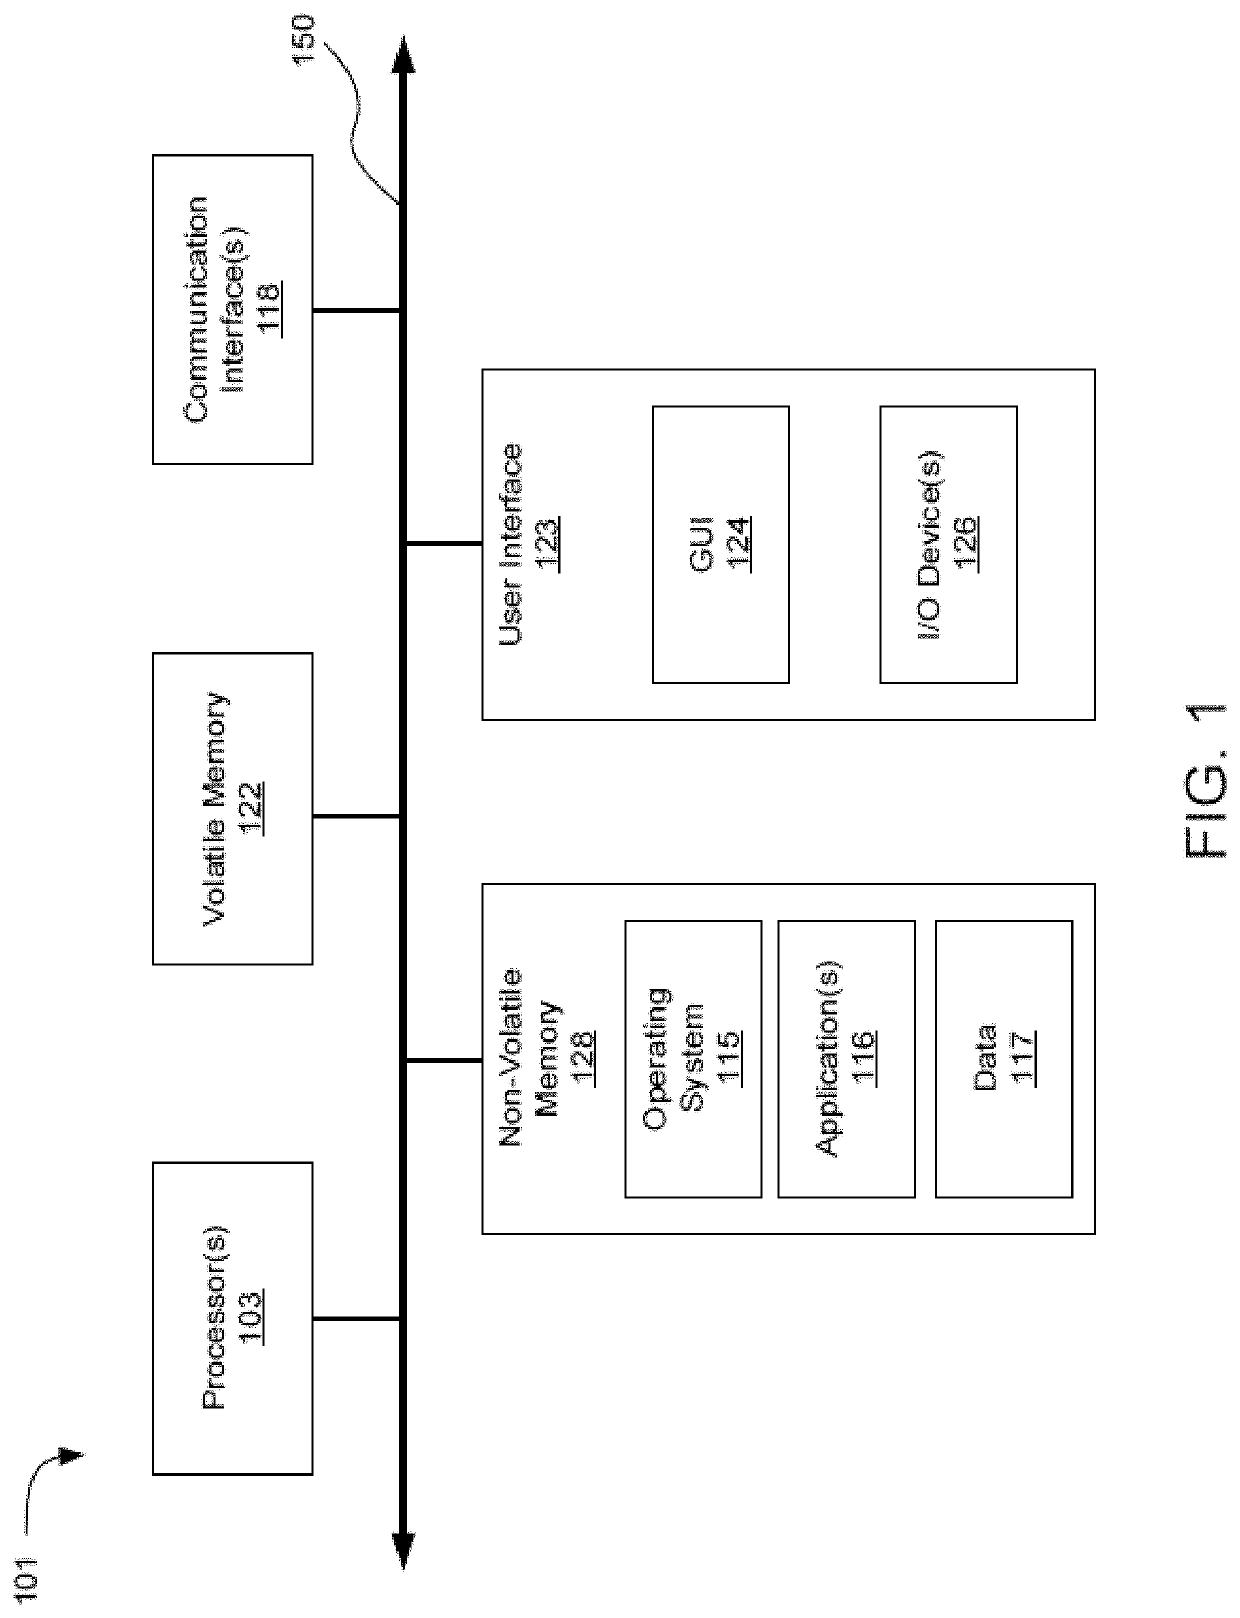 Systems and methods for consistent enforcement policy across different saas applications via embedded browser